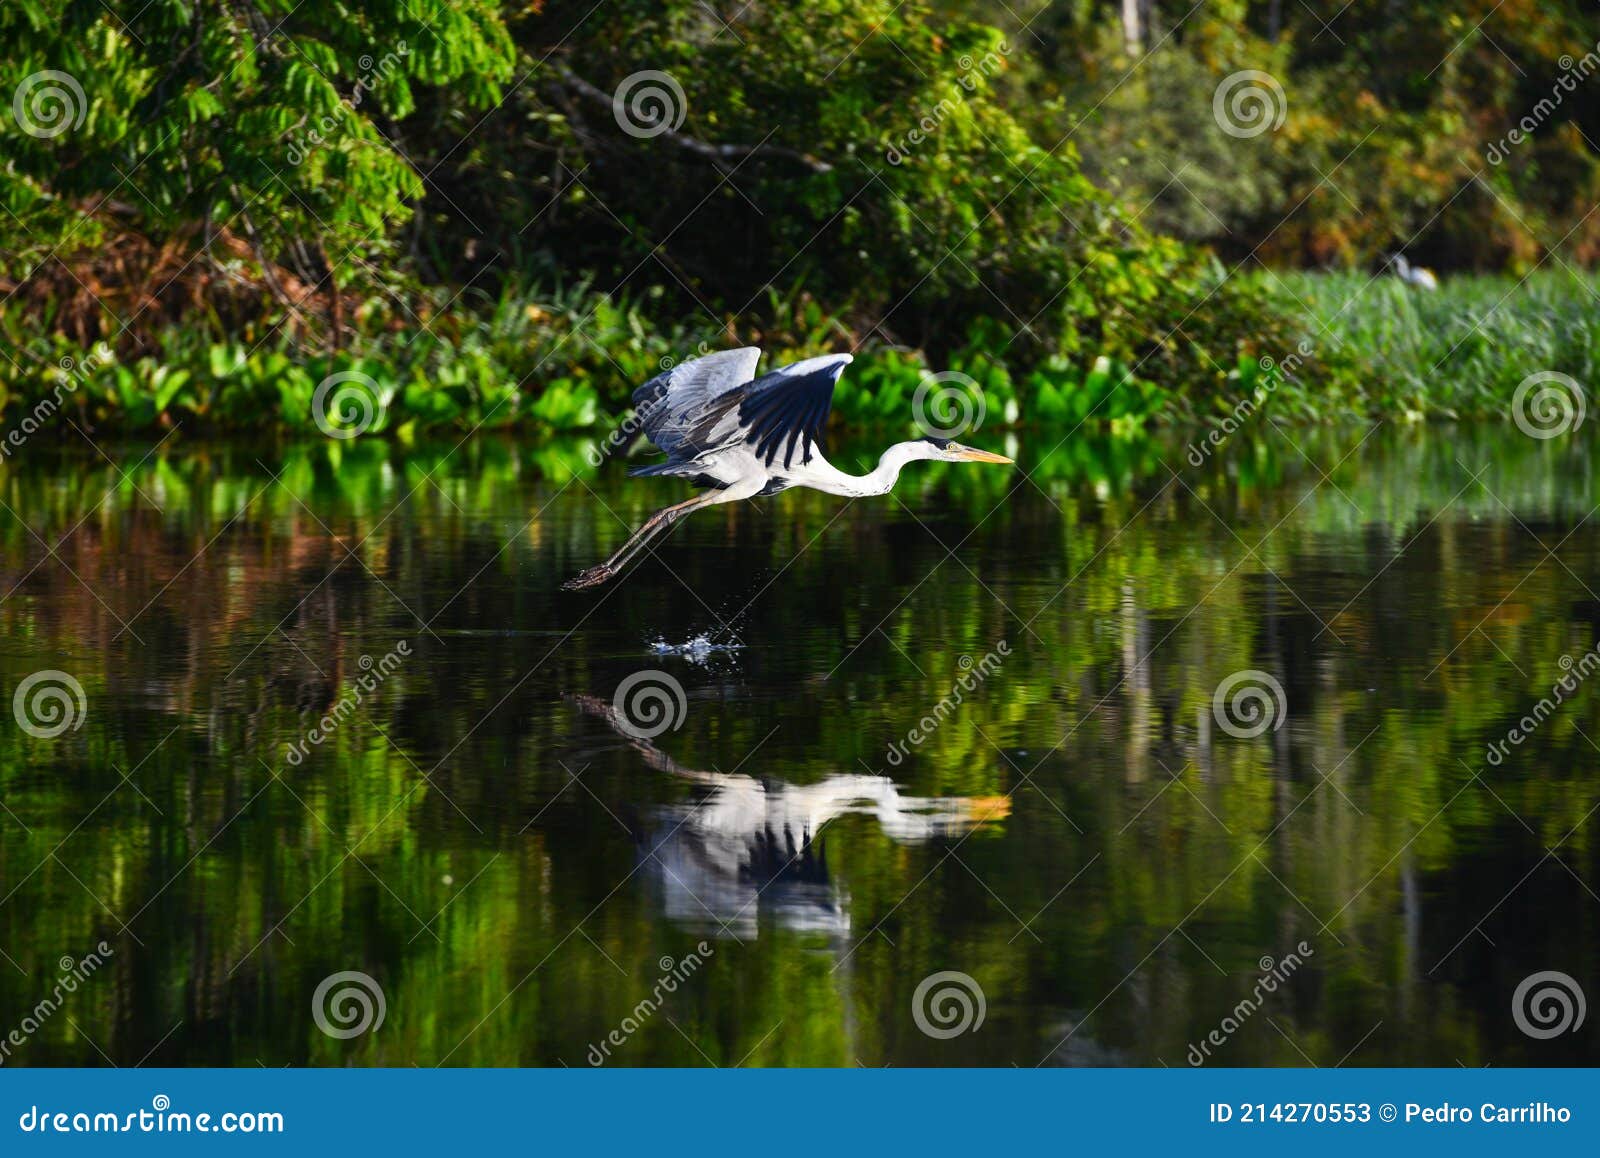 a heron in the amazon